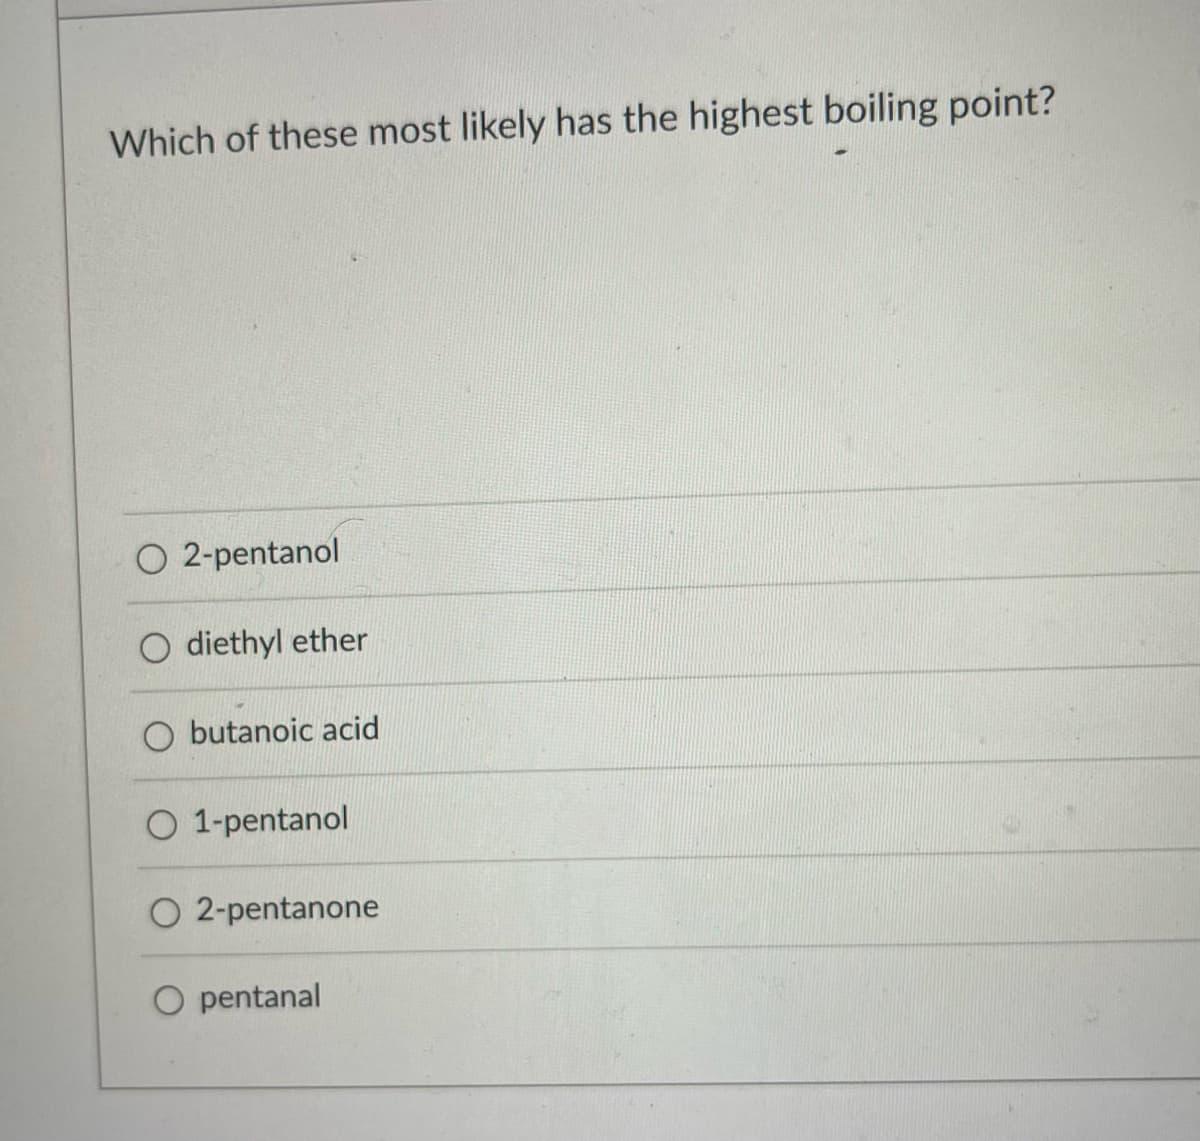 Which of these most likely has the highest boiling point?
O2-pentanol
O diethyl ether
O butanoic acid
O 1-pentanol
O 2-pentanone
pentanal